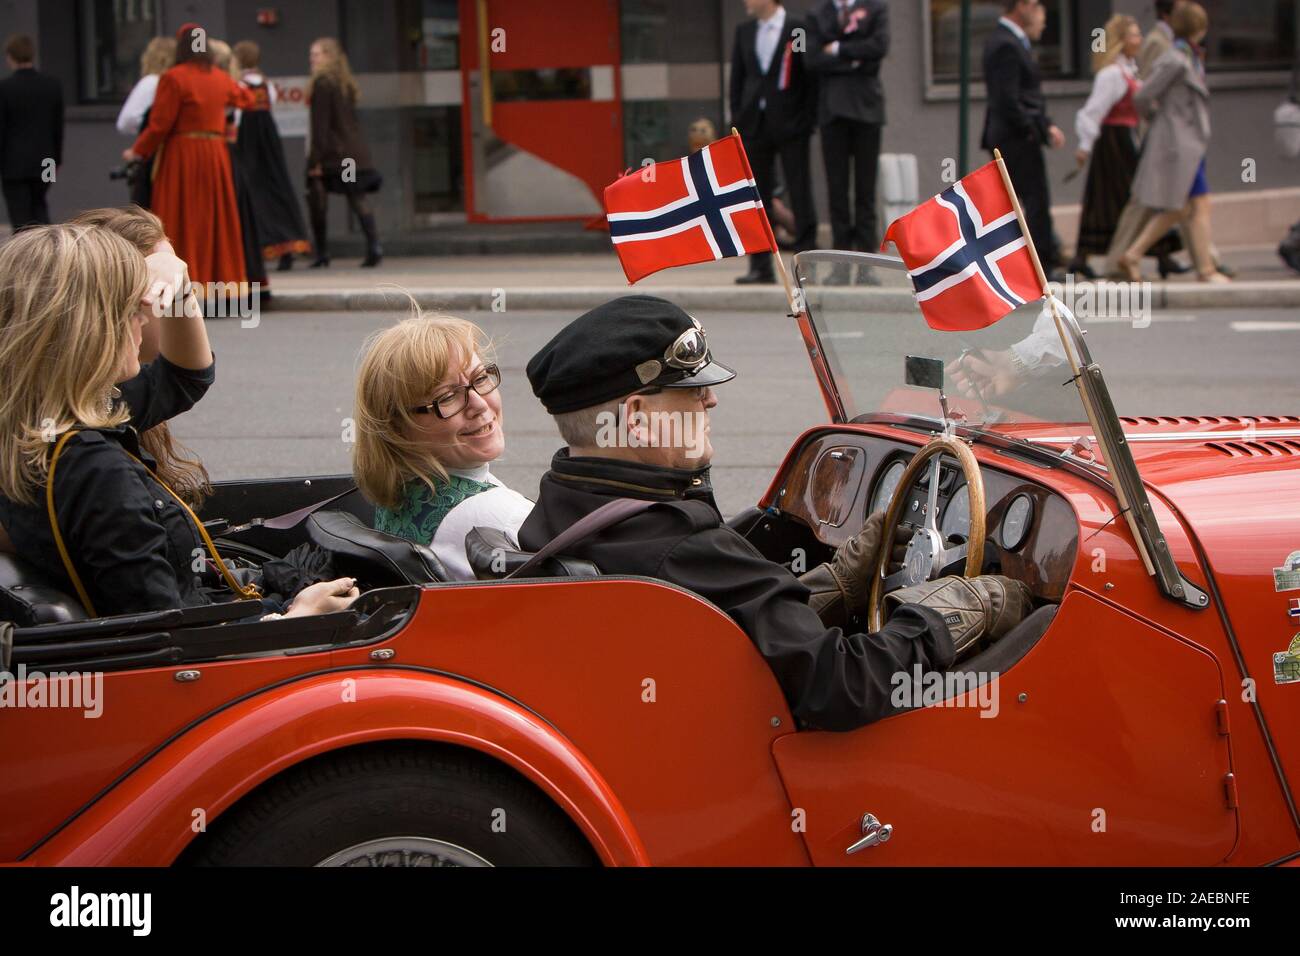 Oslo, Norway - May 17, 2010: National day in Norway. Norwegians on traditional celebration and parade on Karl Johans Gate street. Stock Photo